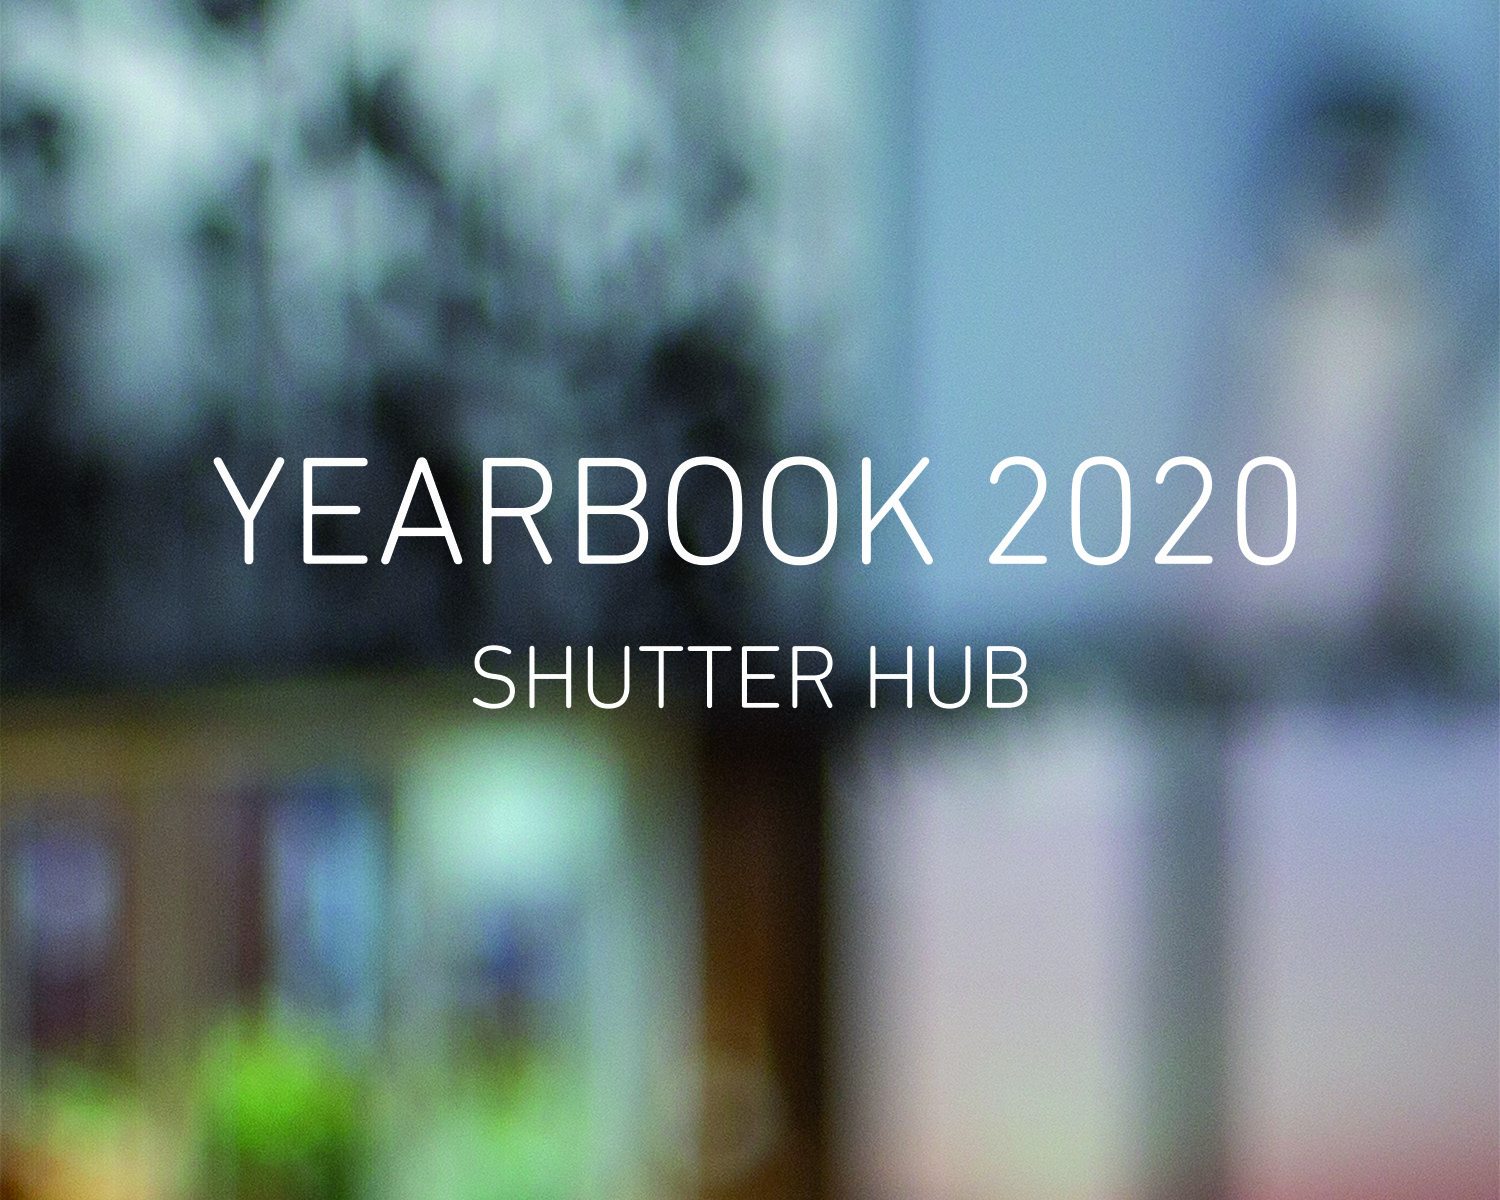 Text ready 'YEARBOOK 2020, SHUTTER HUB' on a background of an out of focus photograph of a screen showing an online exhibition.